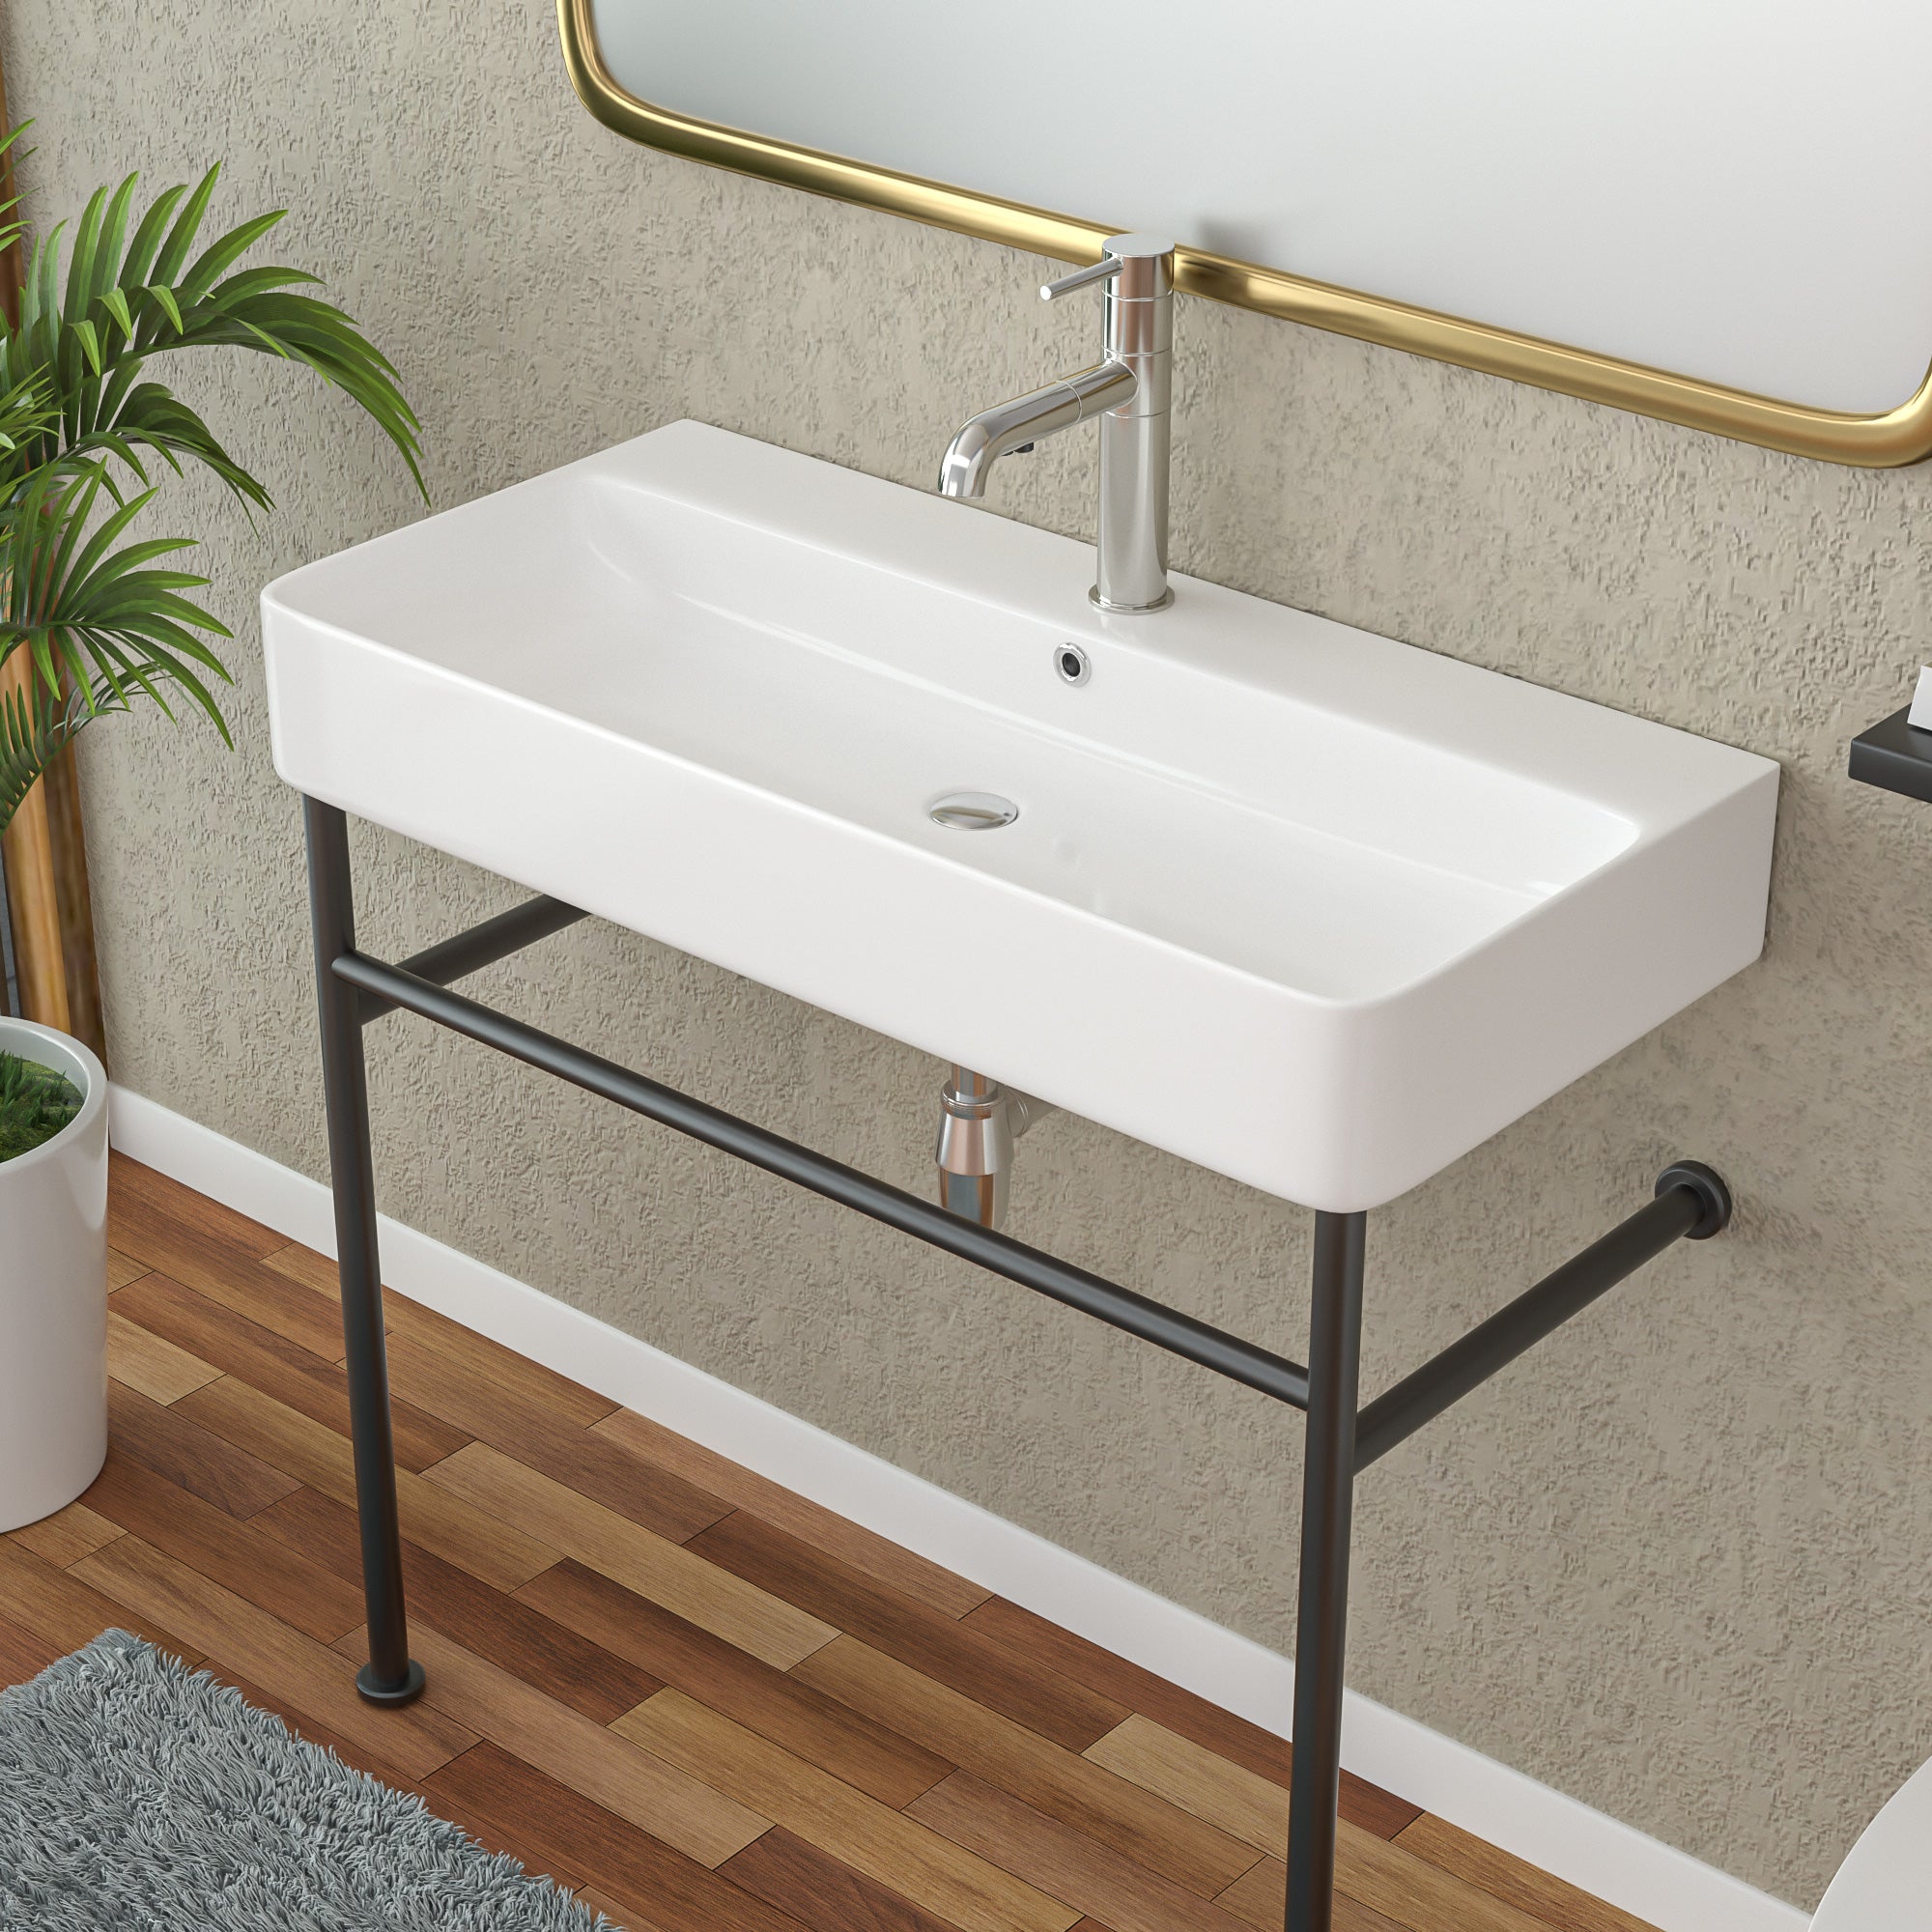 32'' W X 17'' D Console Bathroom Sink Ceramic Rectangular with Overflow in White Basin from Lordear